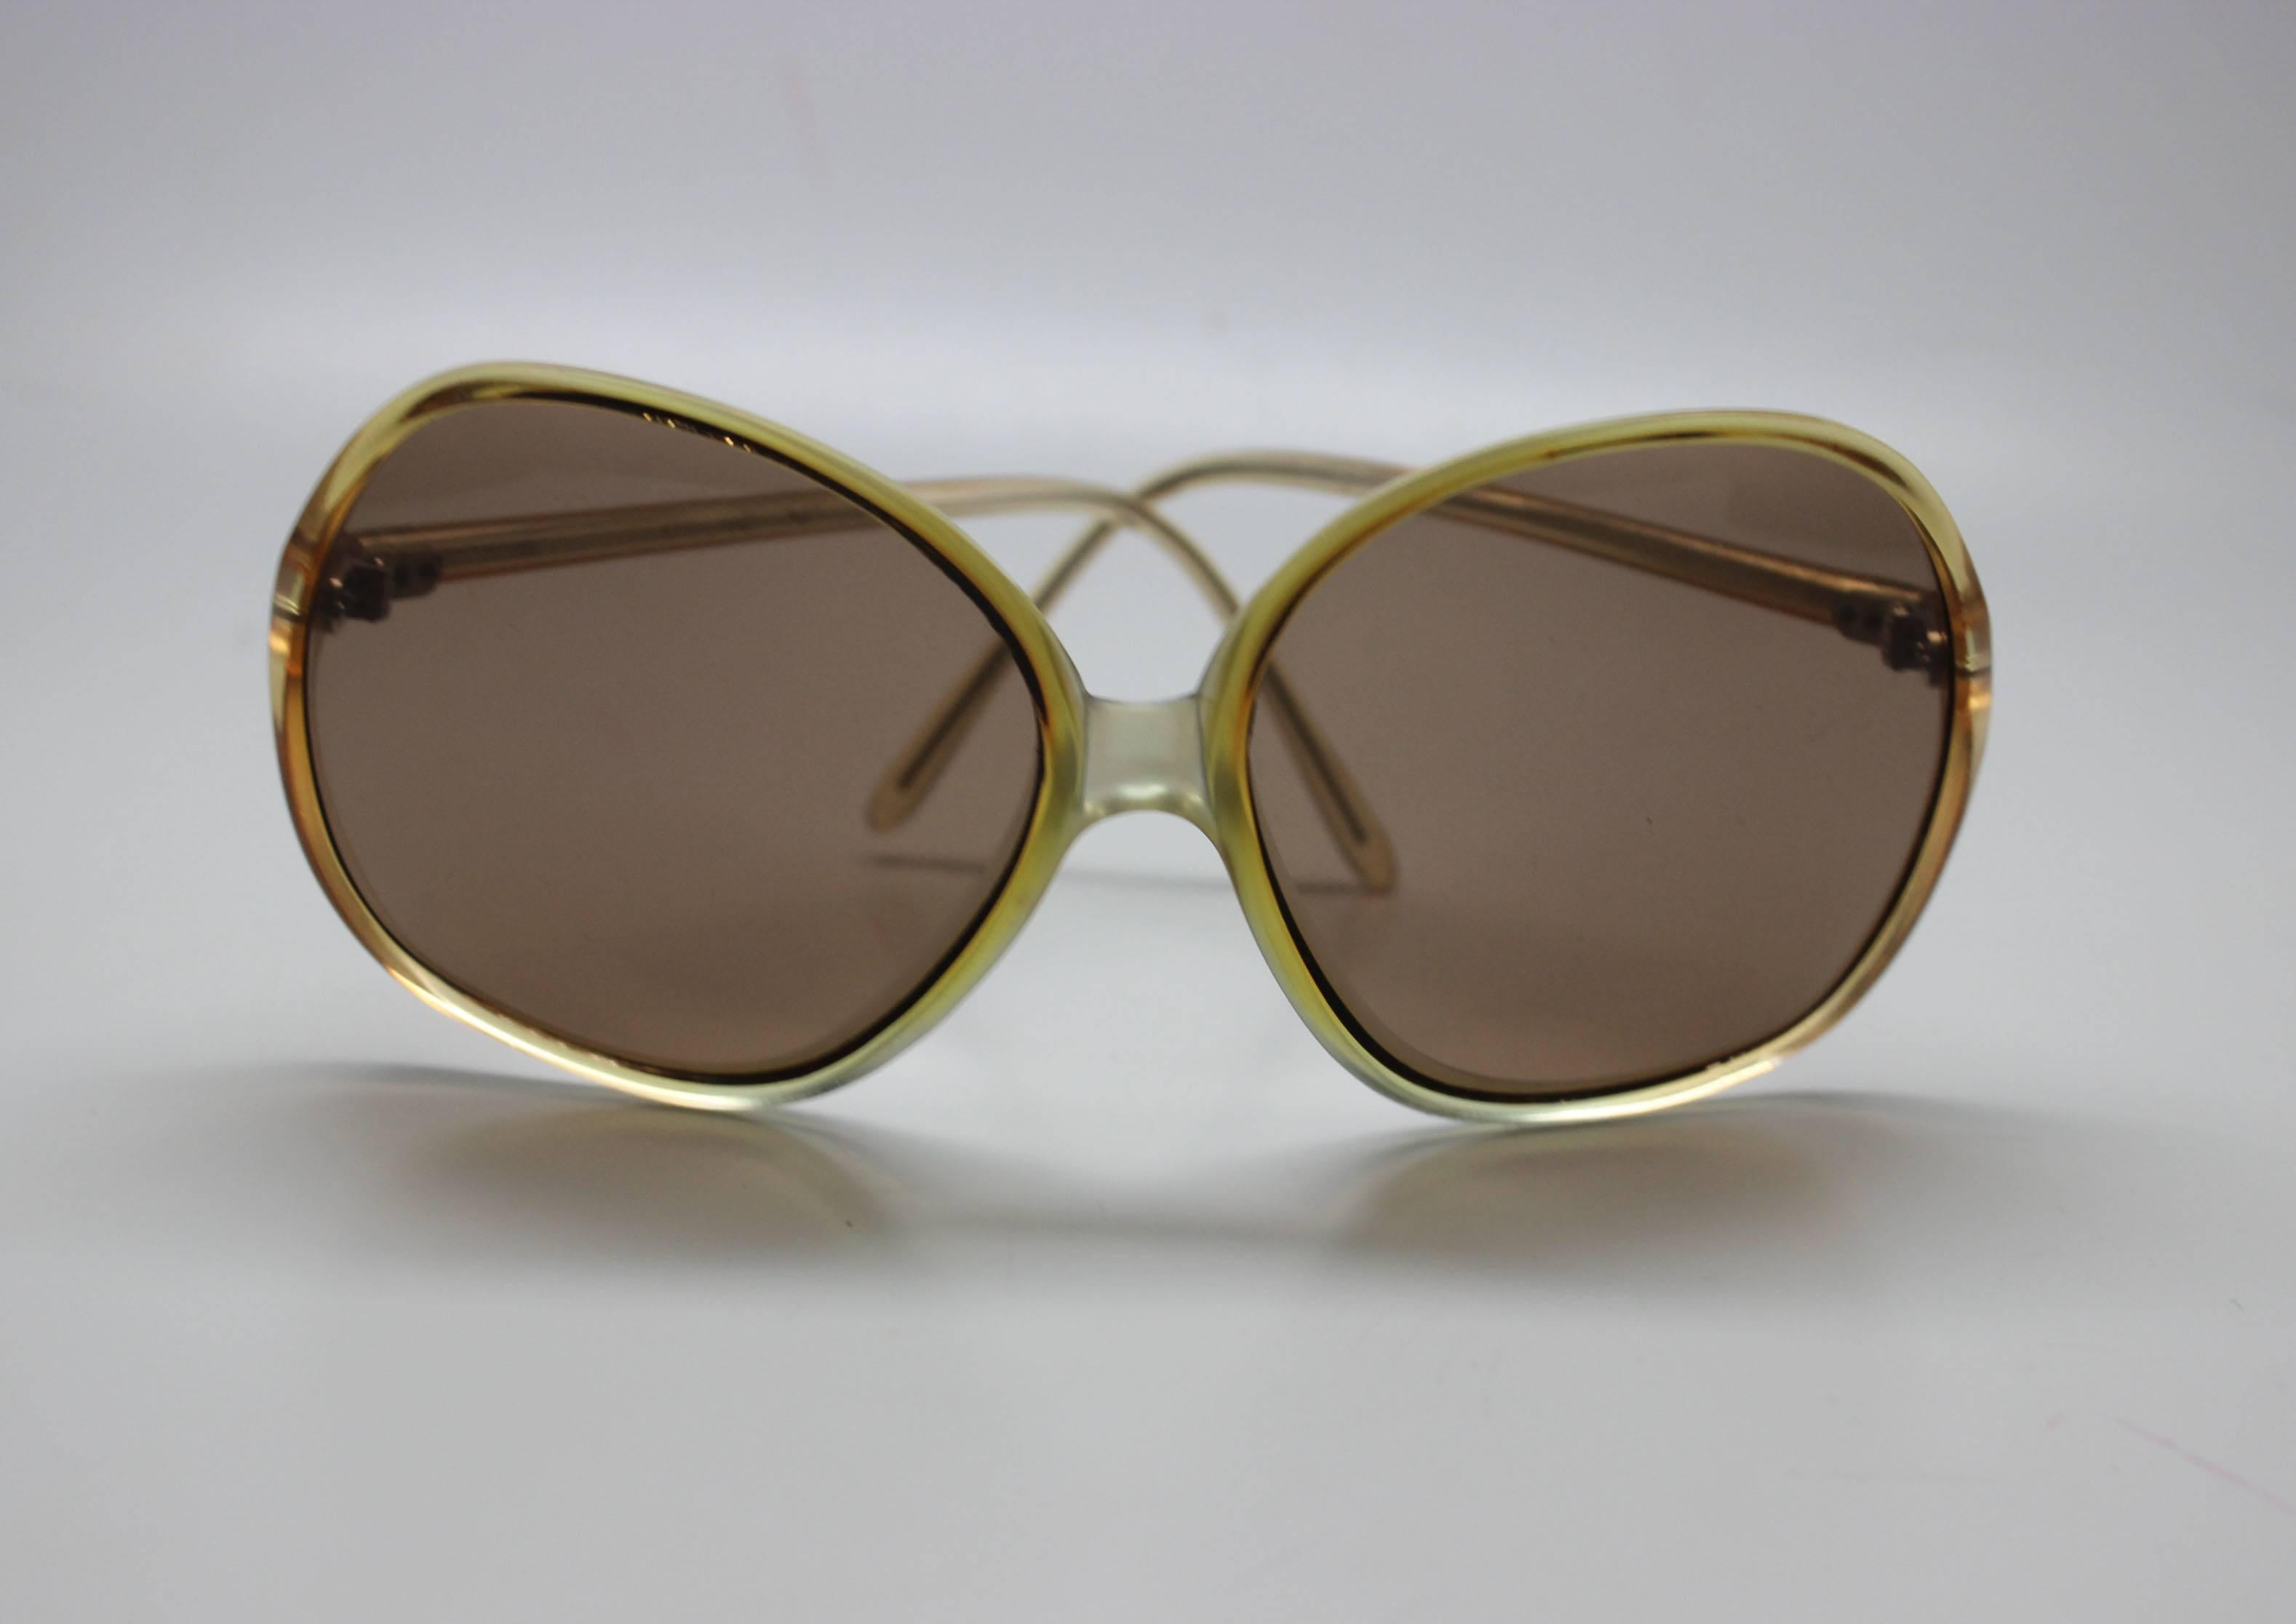 This pair of shades comes from a collection of sunglasses that had been warehoused since the 1970's. They are good quality, the frames were made in France. The style is very au courant to today's trends. 